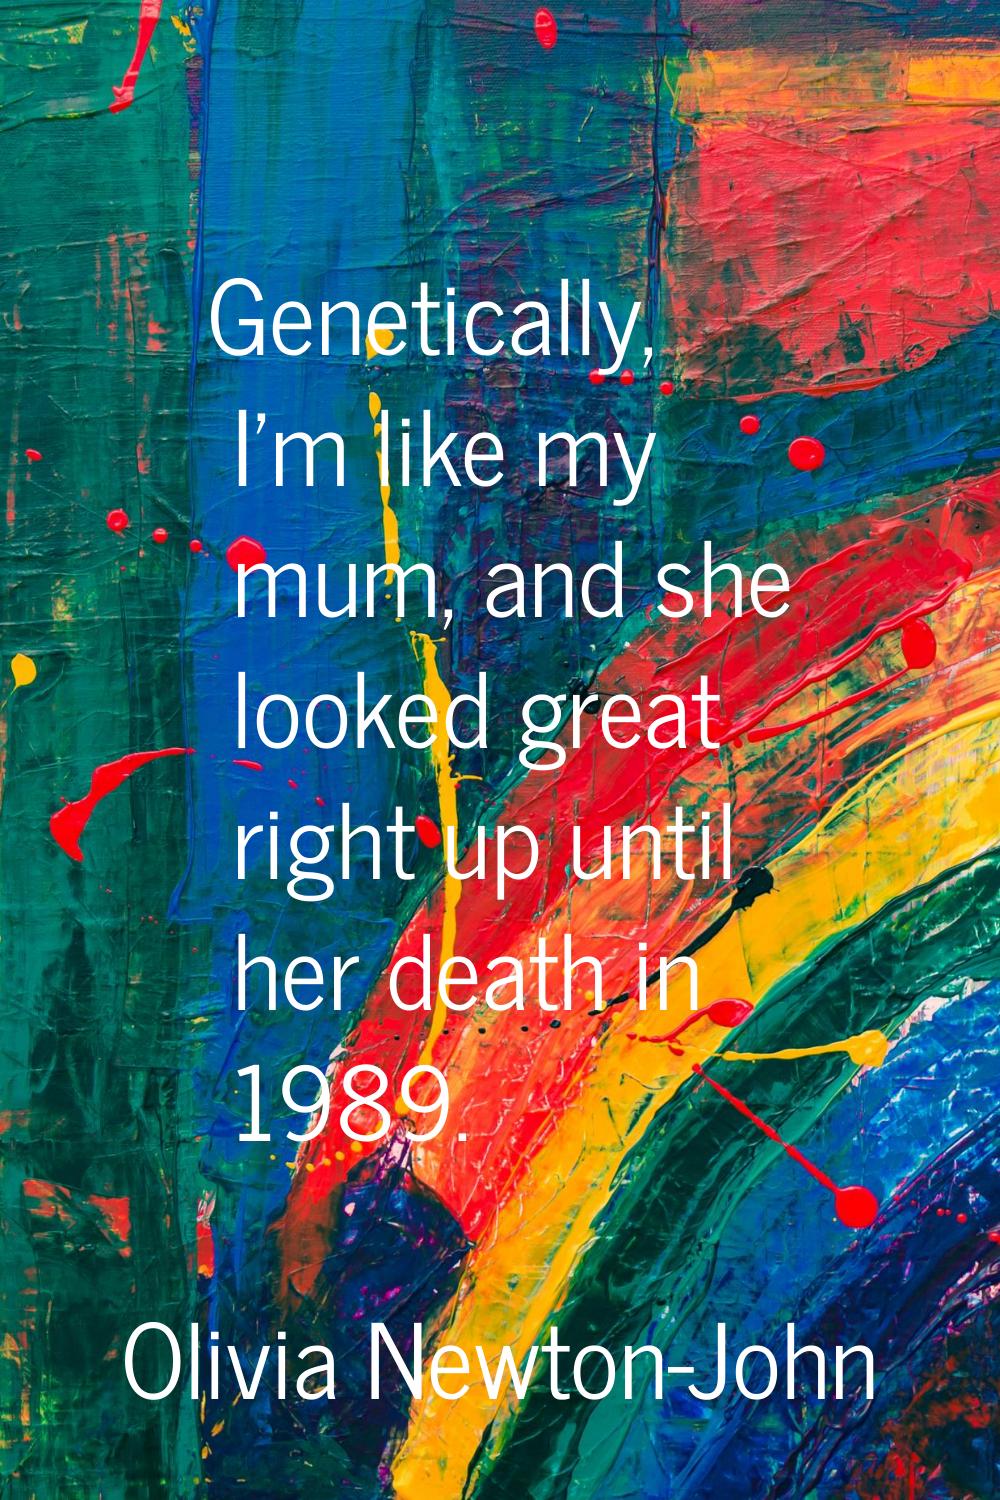 Genetically, I'm like my mum, and she looked great right up until her death in 1989.